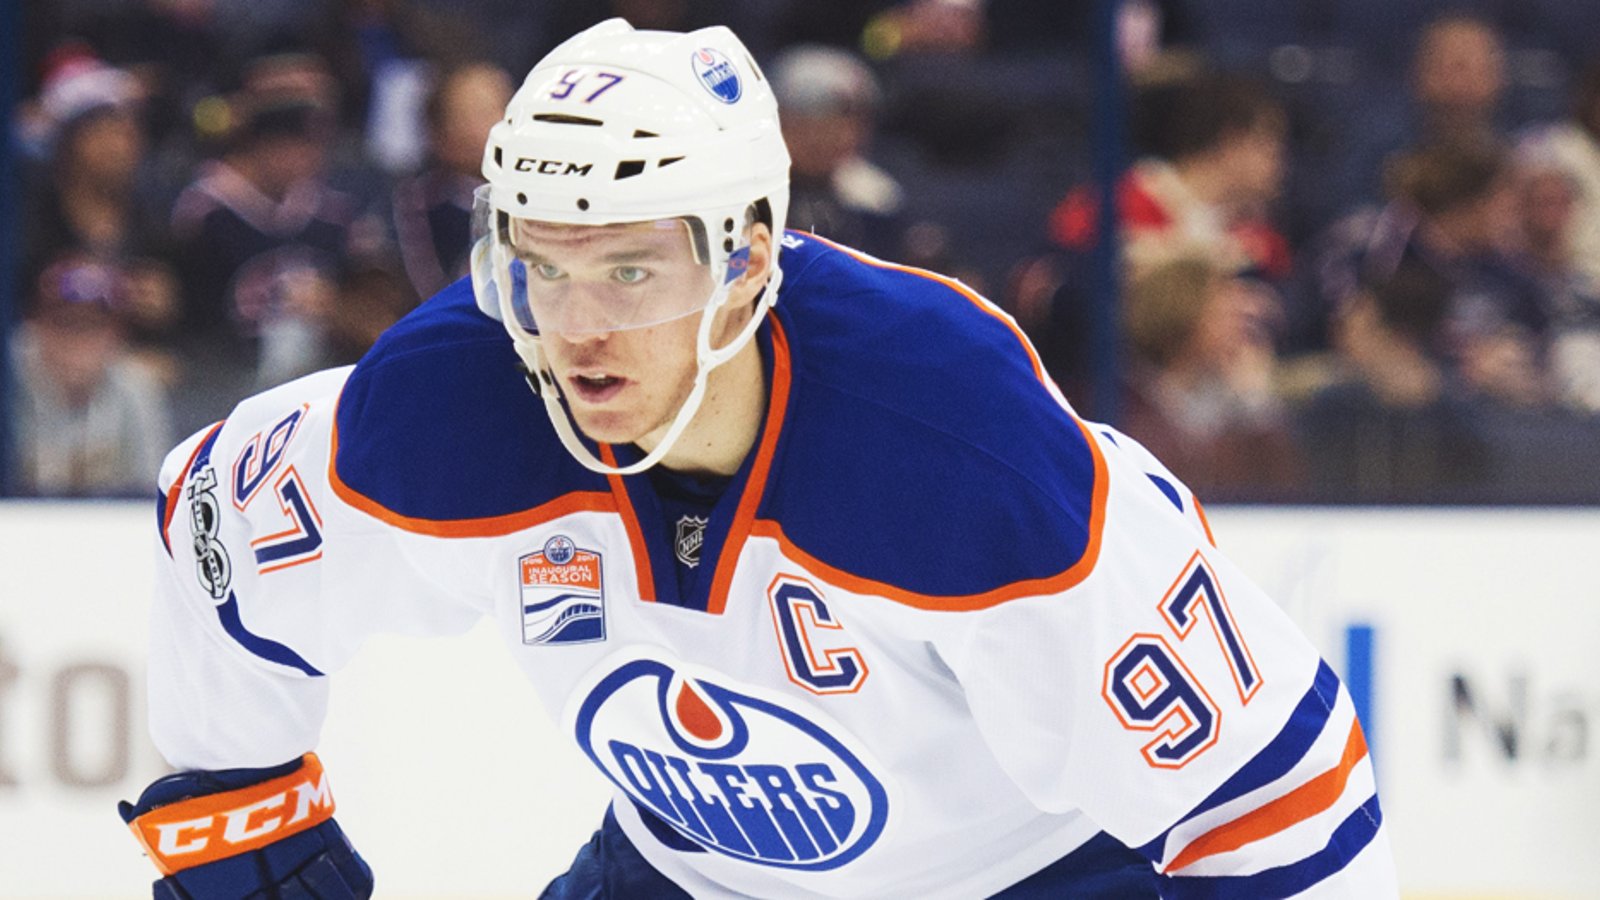 Breaking: Connor McDavid has officially signed a monster contract extension.